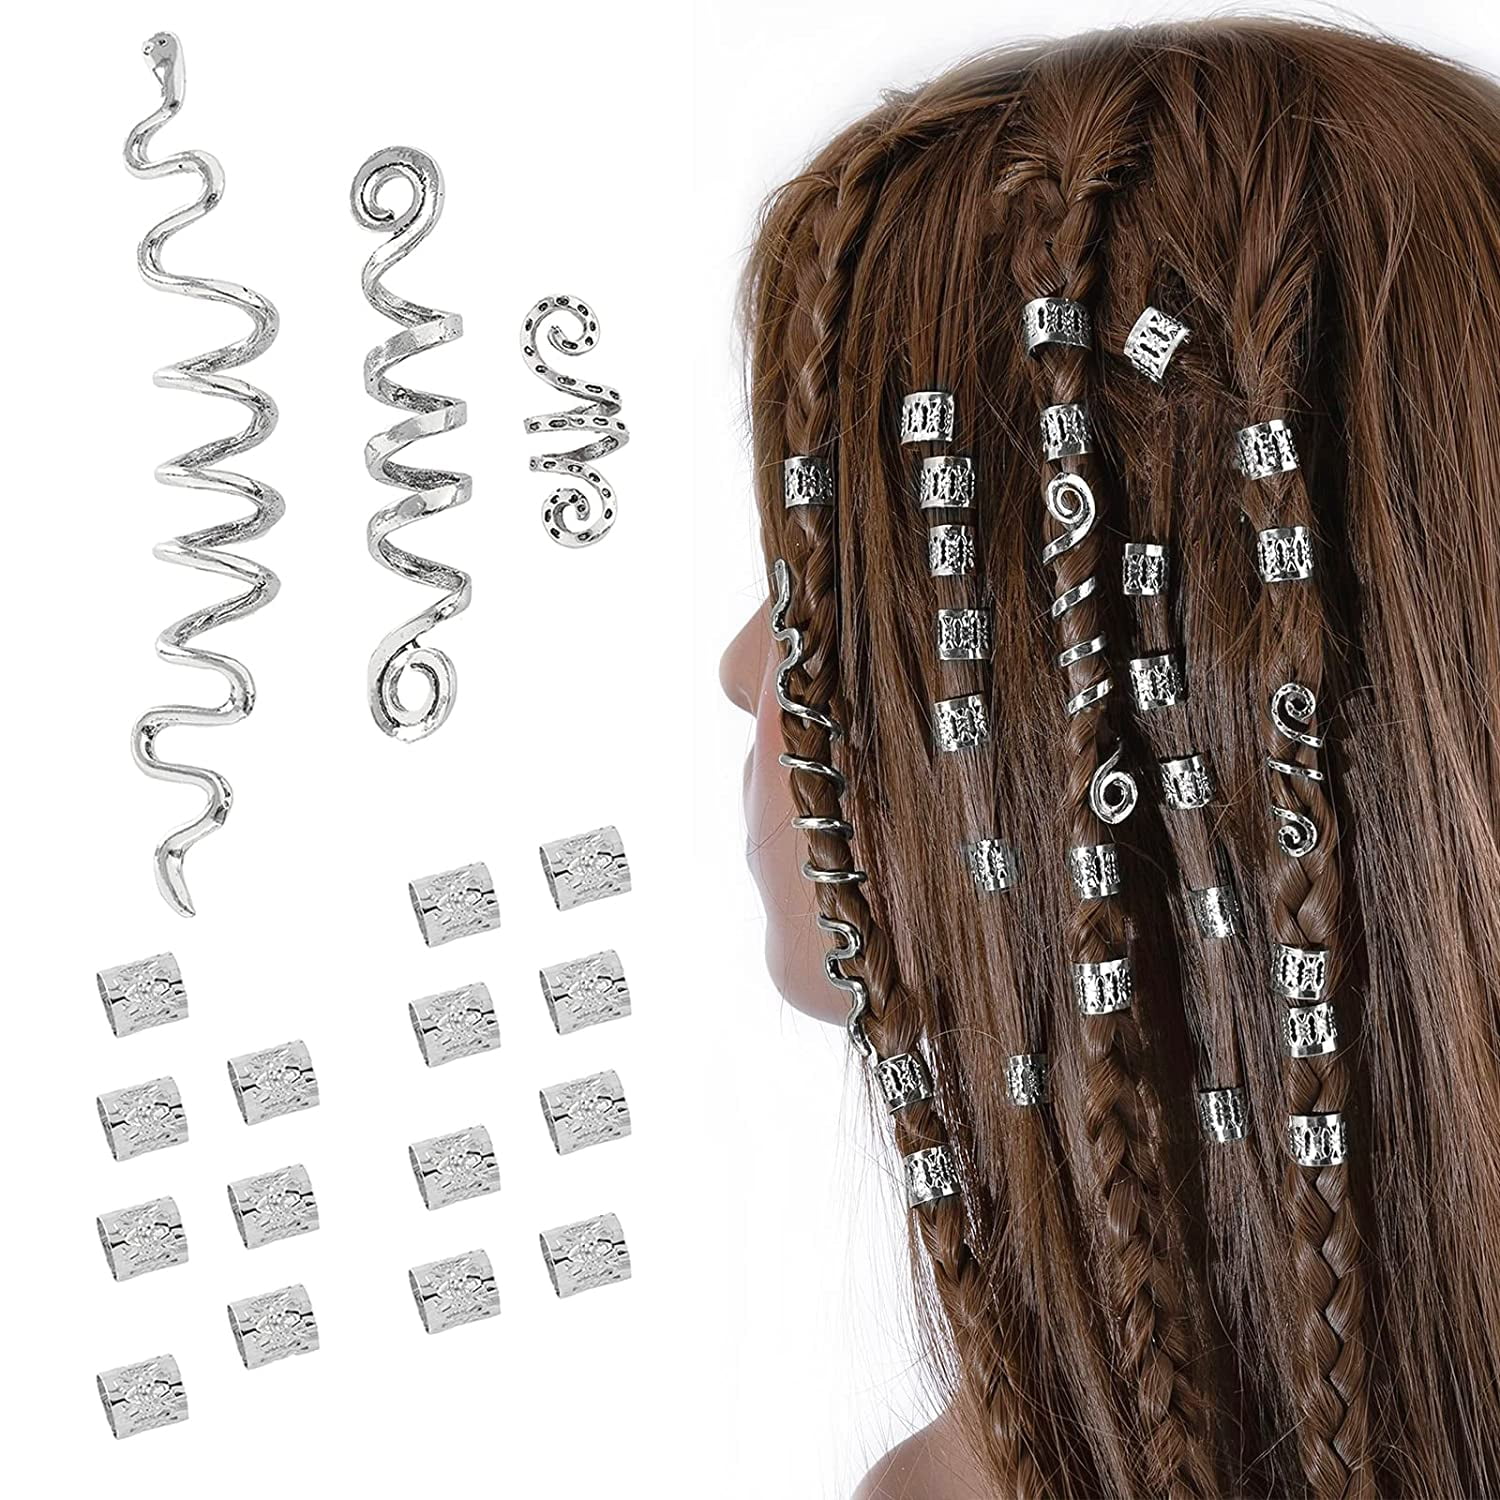 Hair Tool Plastic Quick Beader for Loading Beads Ponytail Maker Styling  Tool (8 Pcs,7 Colors)